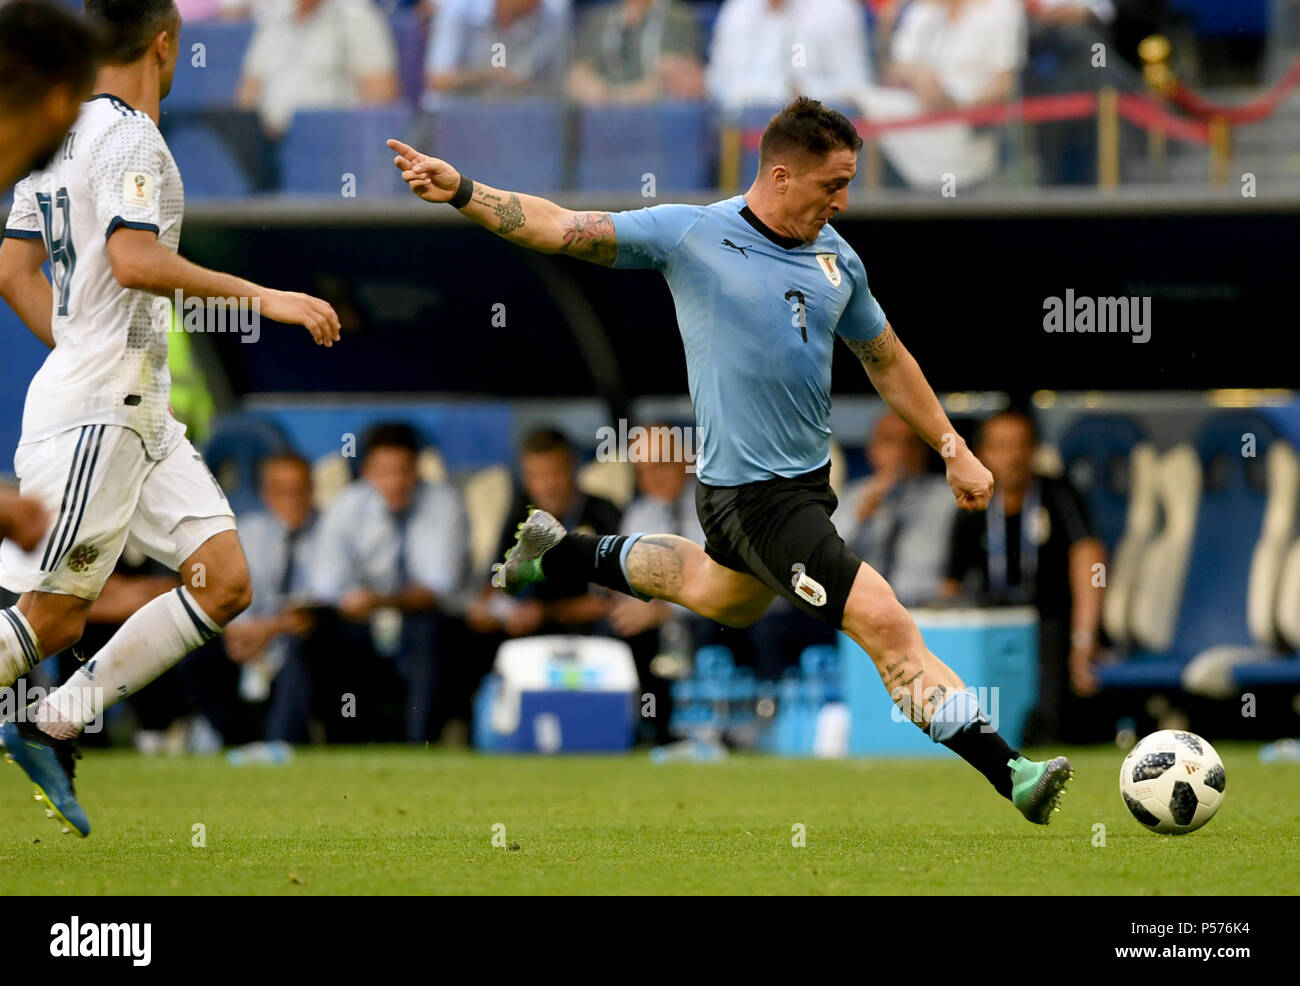 Samara, Russia. 25th June, 2018. Cristian Rodriguez (R) of Uruguay shoots during the 2018 FIFA World Cup Group A match between Uruguay and Russia in Samara, Russia, June 25, 2018. Uruguay won 3-0. Russia and Uruguay advanced to the round of 16. Credit: Du Yu/Xinhua/Alamy Live News Stock Photo